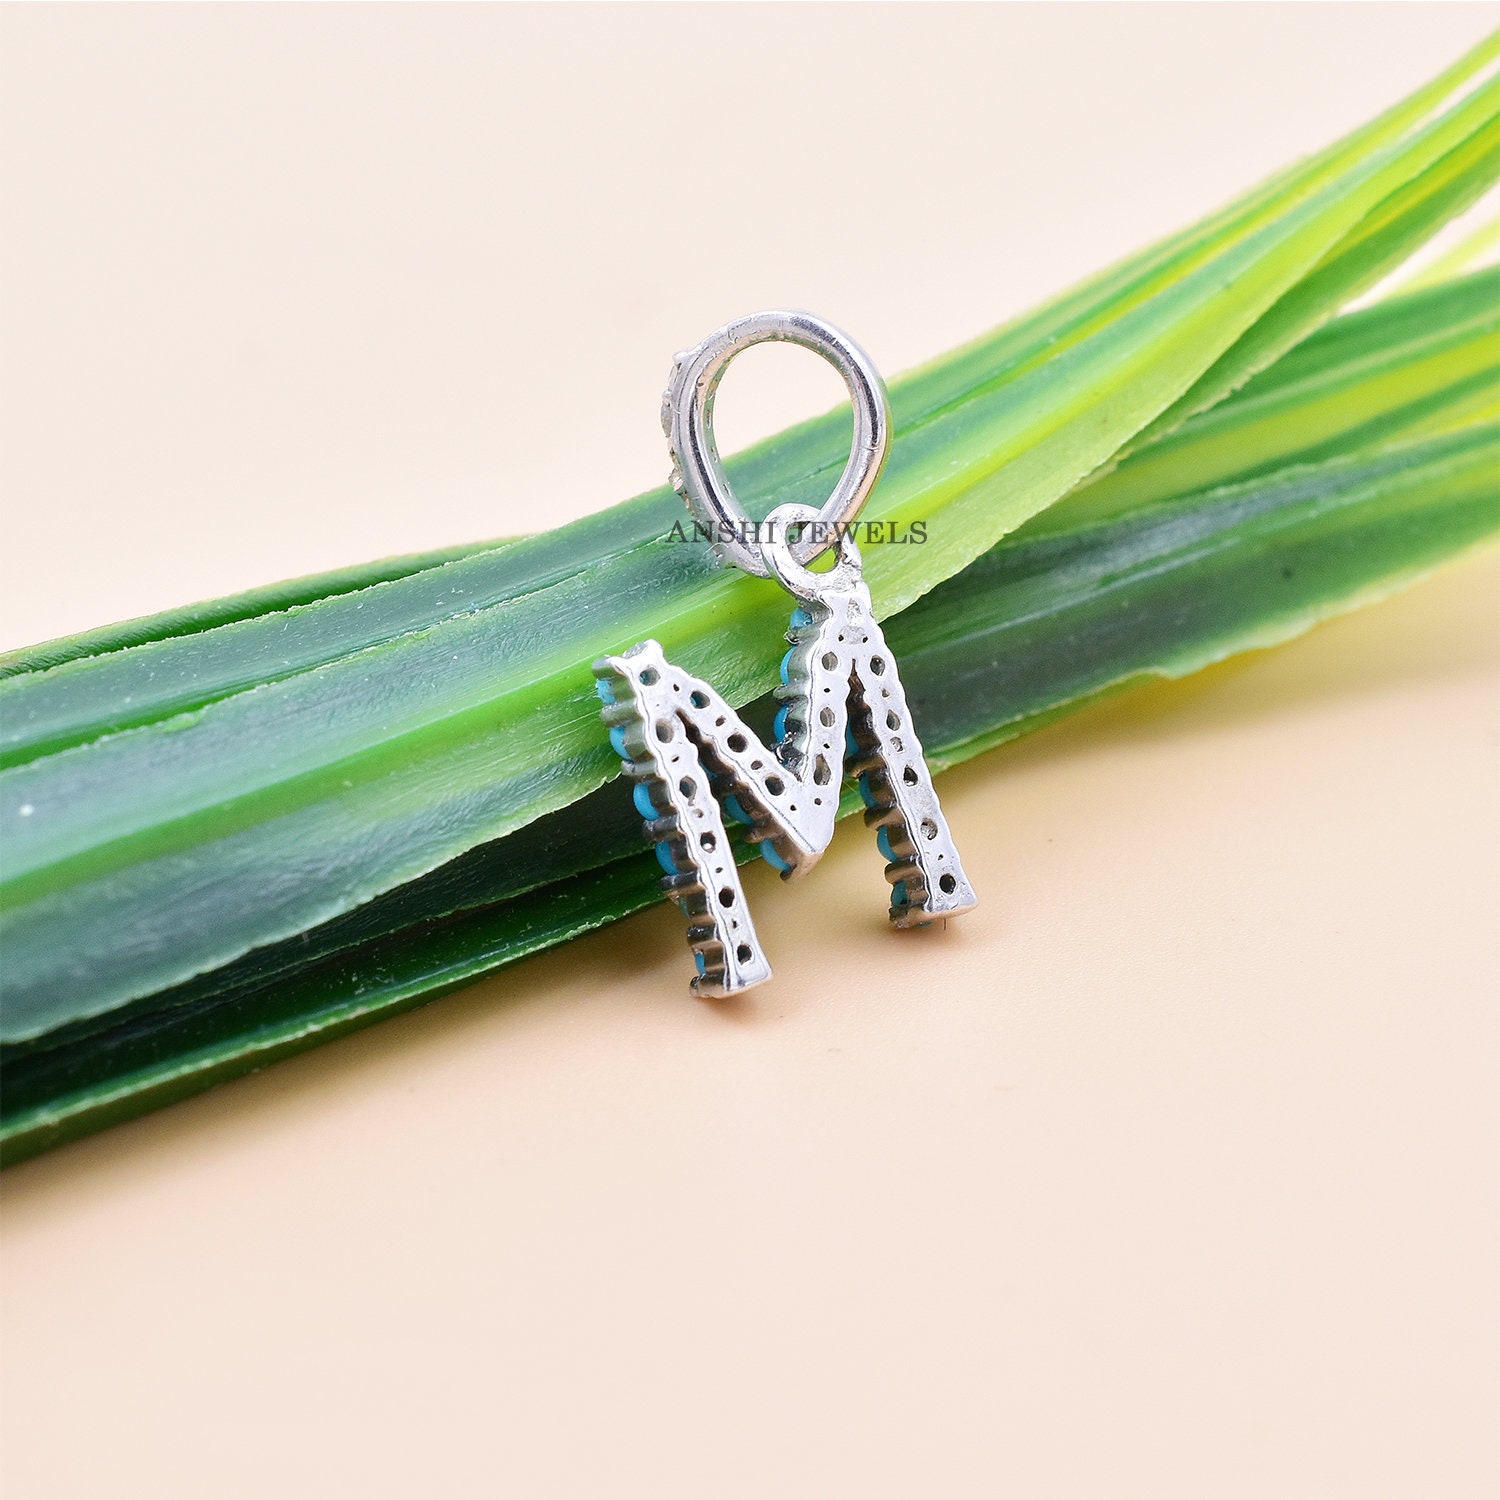 Letter Charms for Necklaces, Sterling Silver Letter Charms